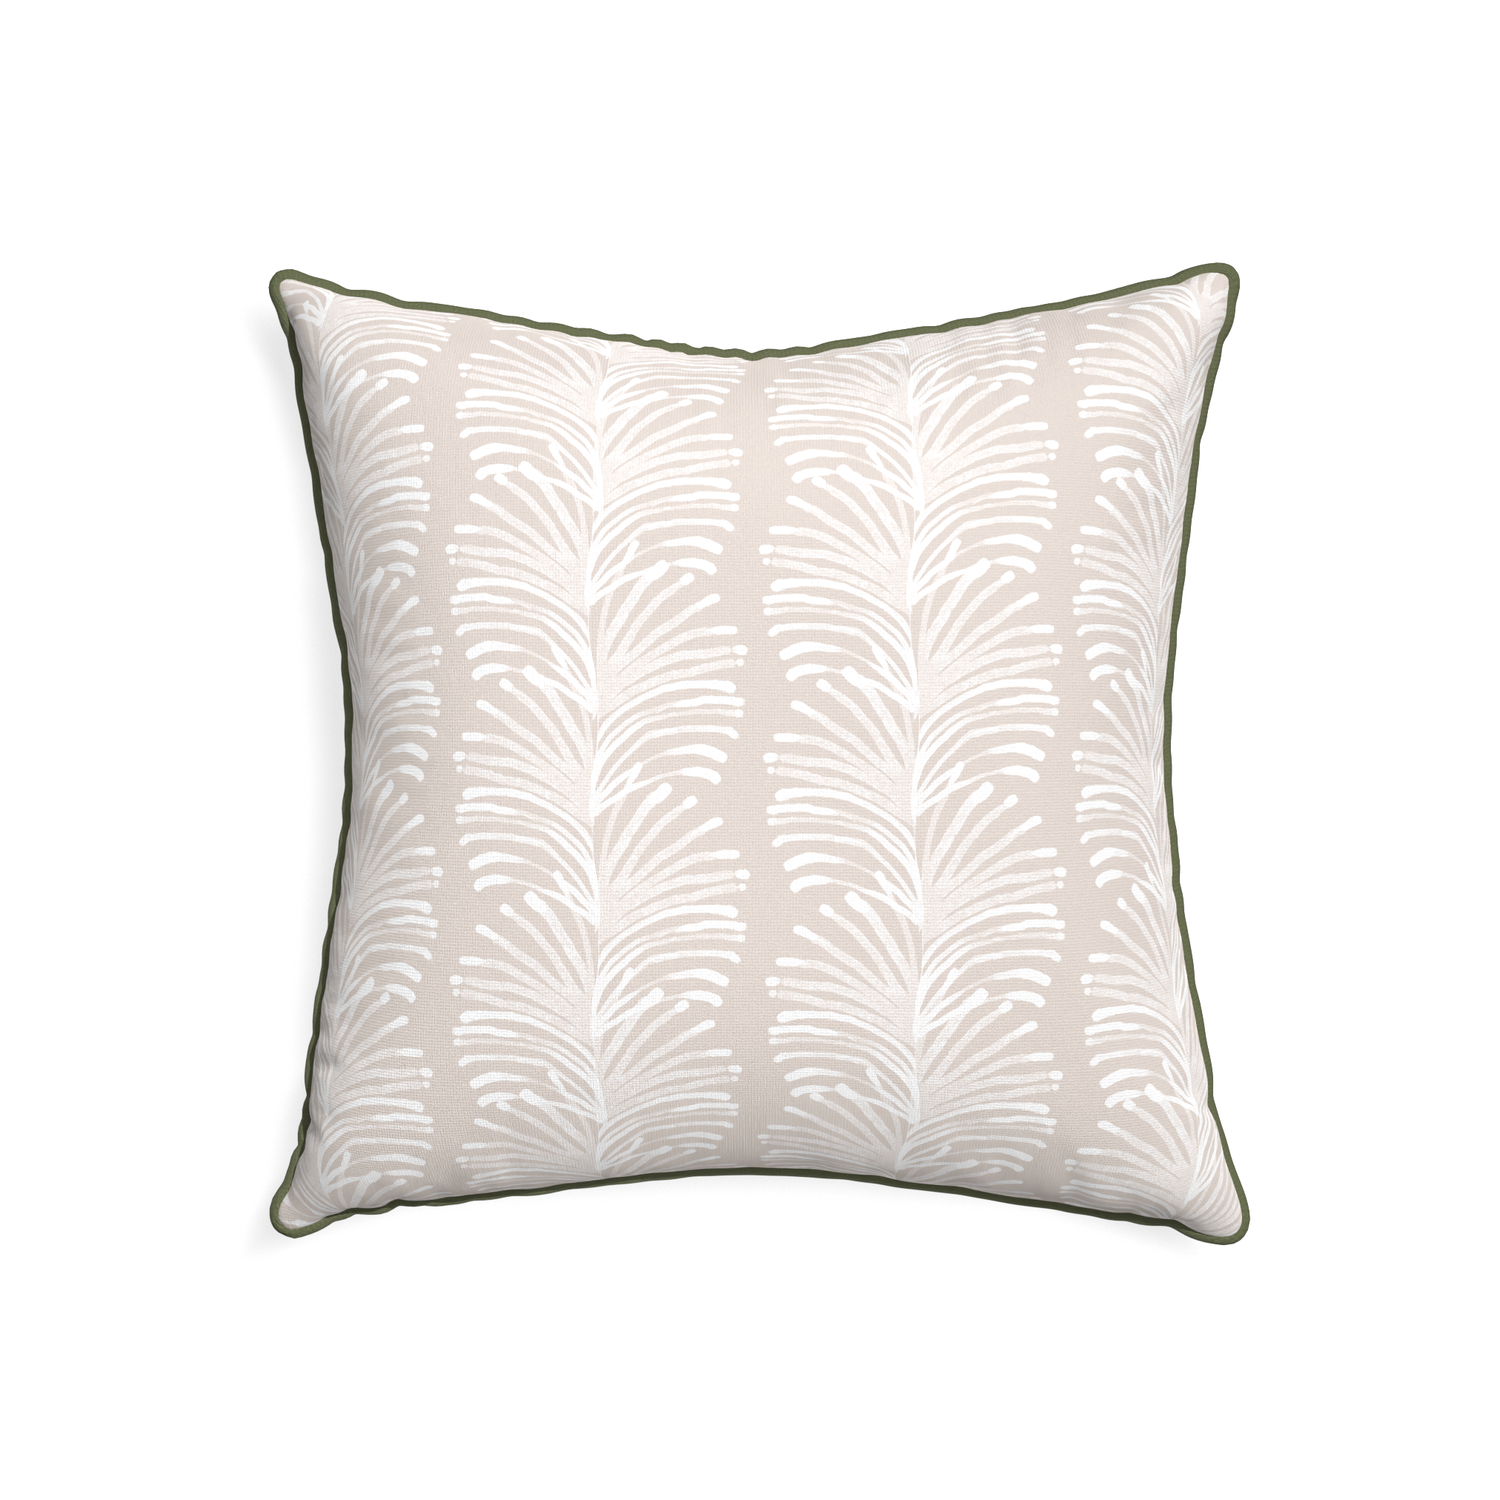 22-square emma sand custom sand colored botanical stripepillow with f piping on white background